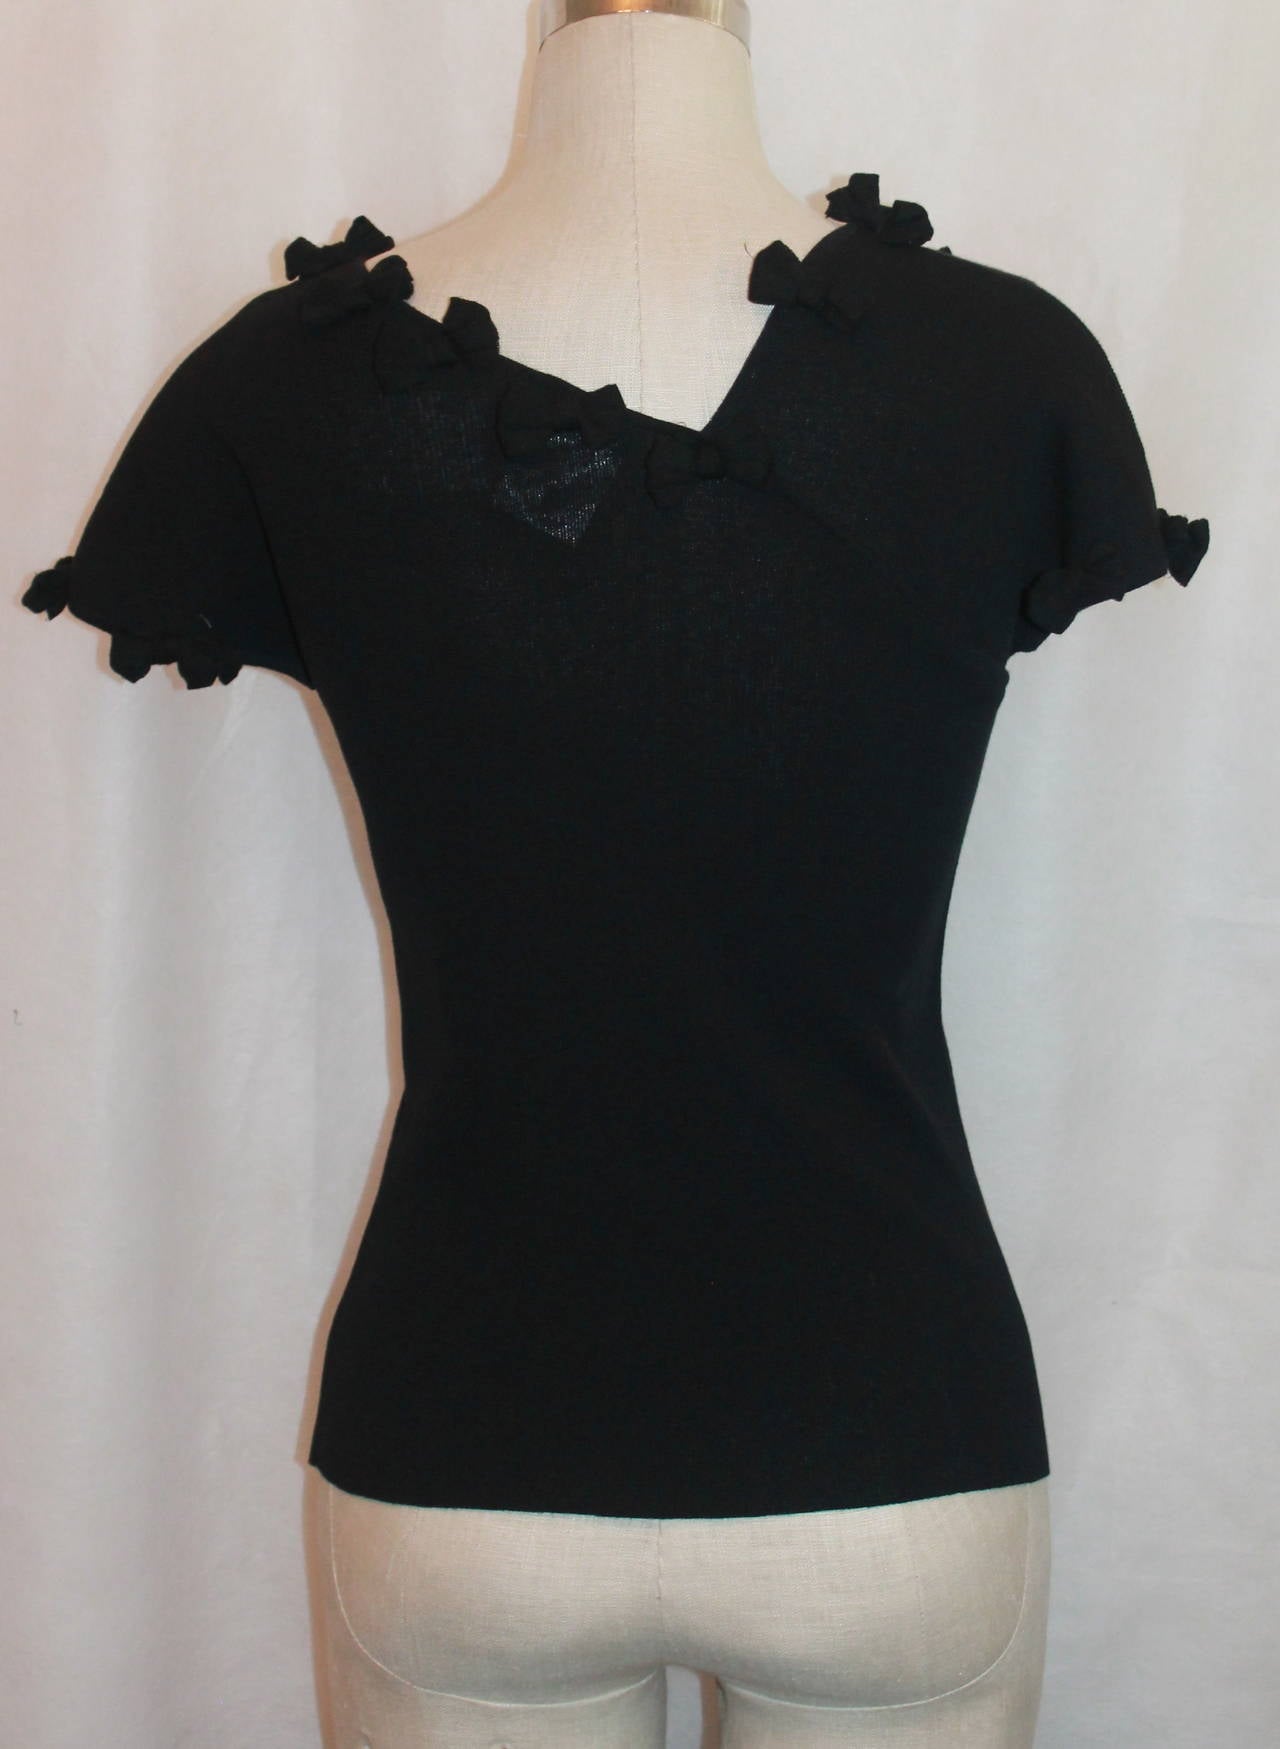 Women's Chanel 1999 Vintage Black Shirt with Small Bow Details - 40